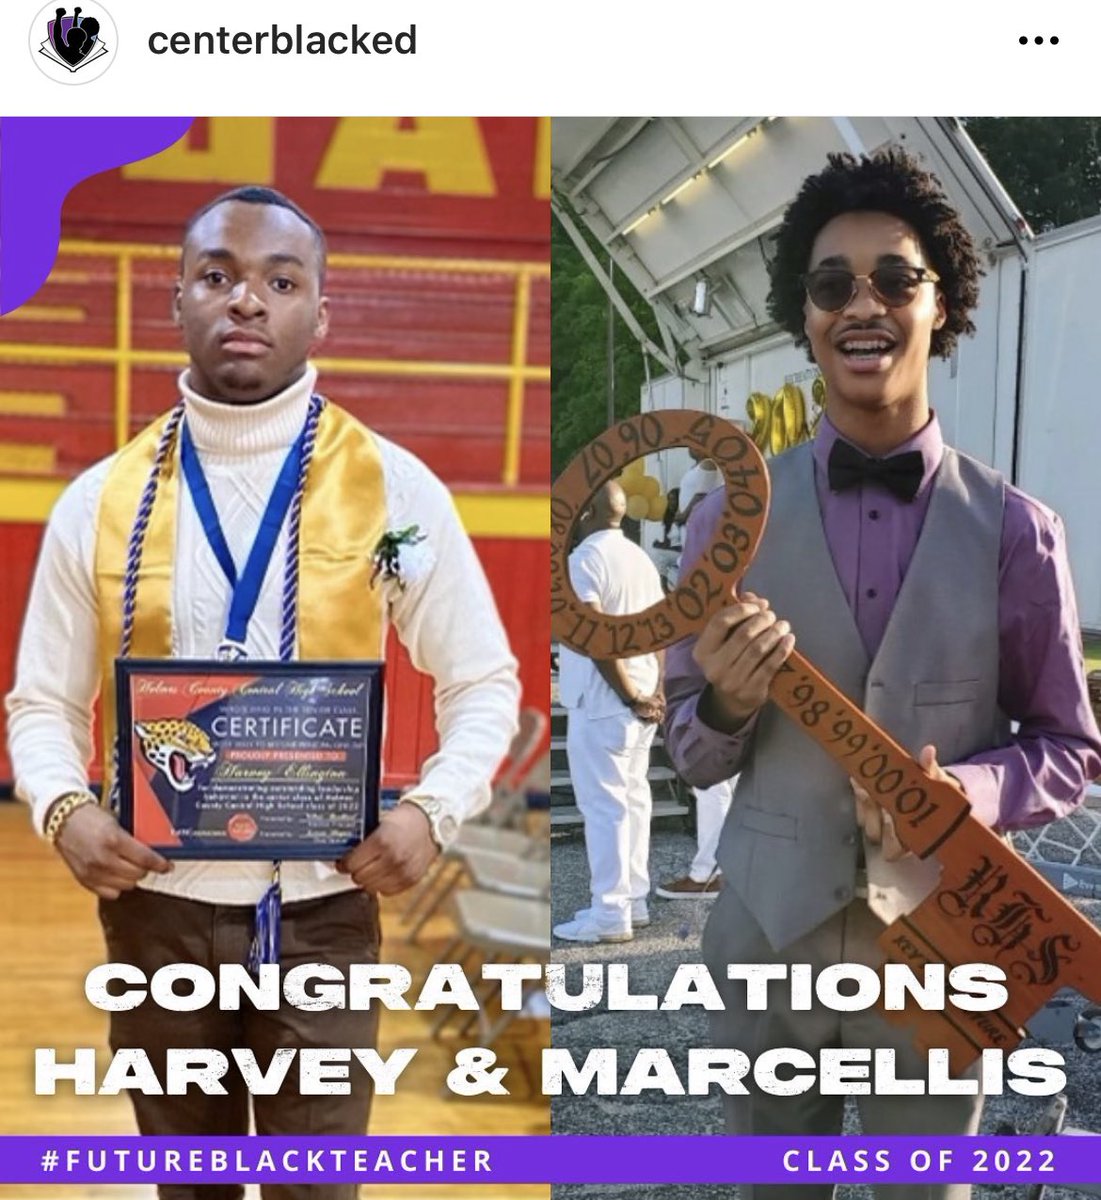 We’re glad to celebrate 2022 HS grad @HarveyEllingto7, heading to @DeltaState and all those working to become a #FutureBlackTeacher, another important campaign led by the @CenterBlackEd!